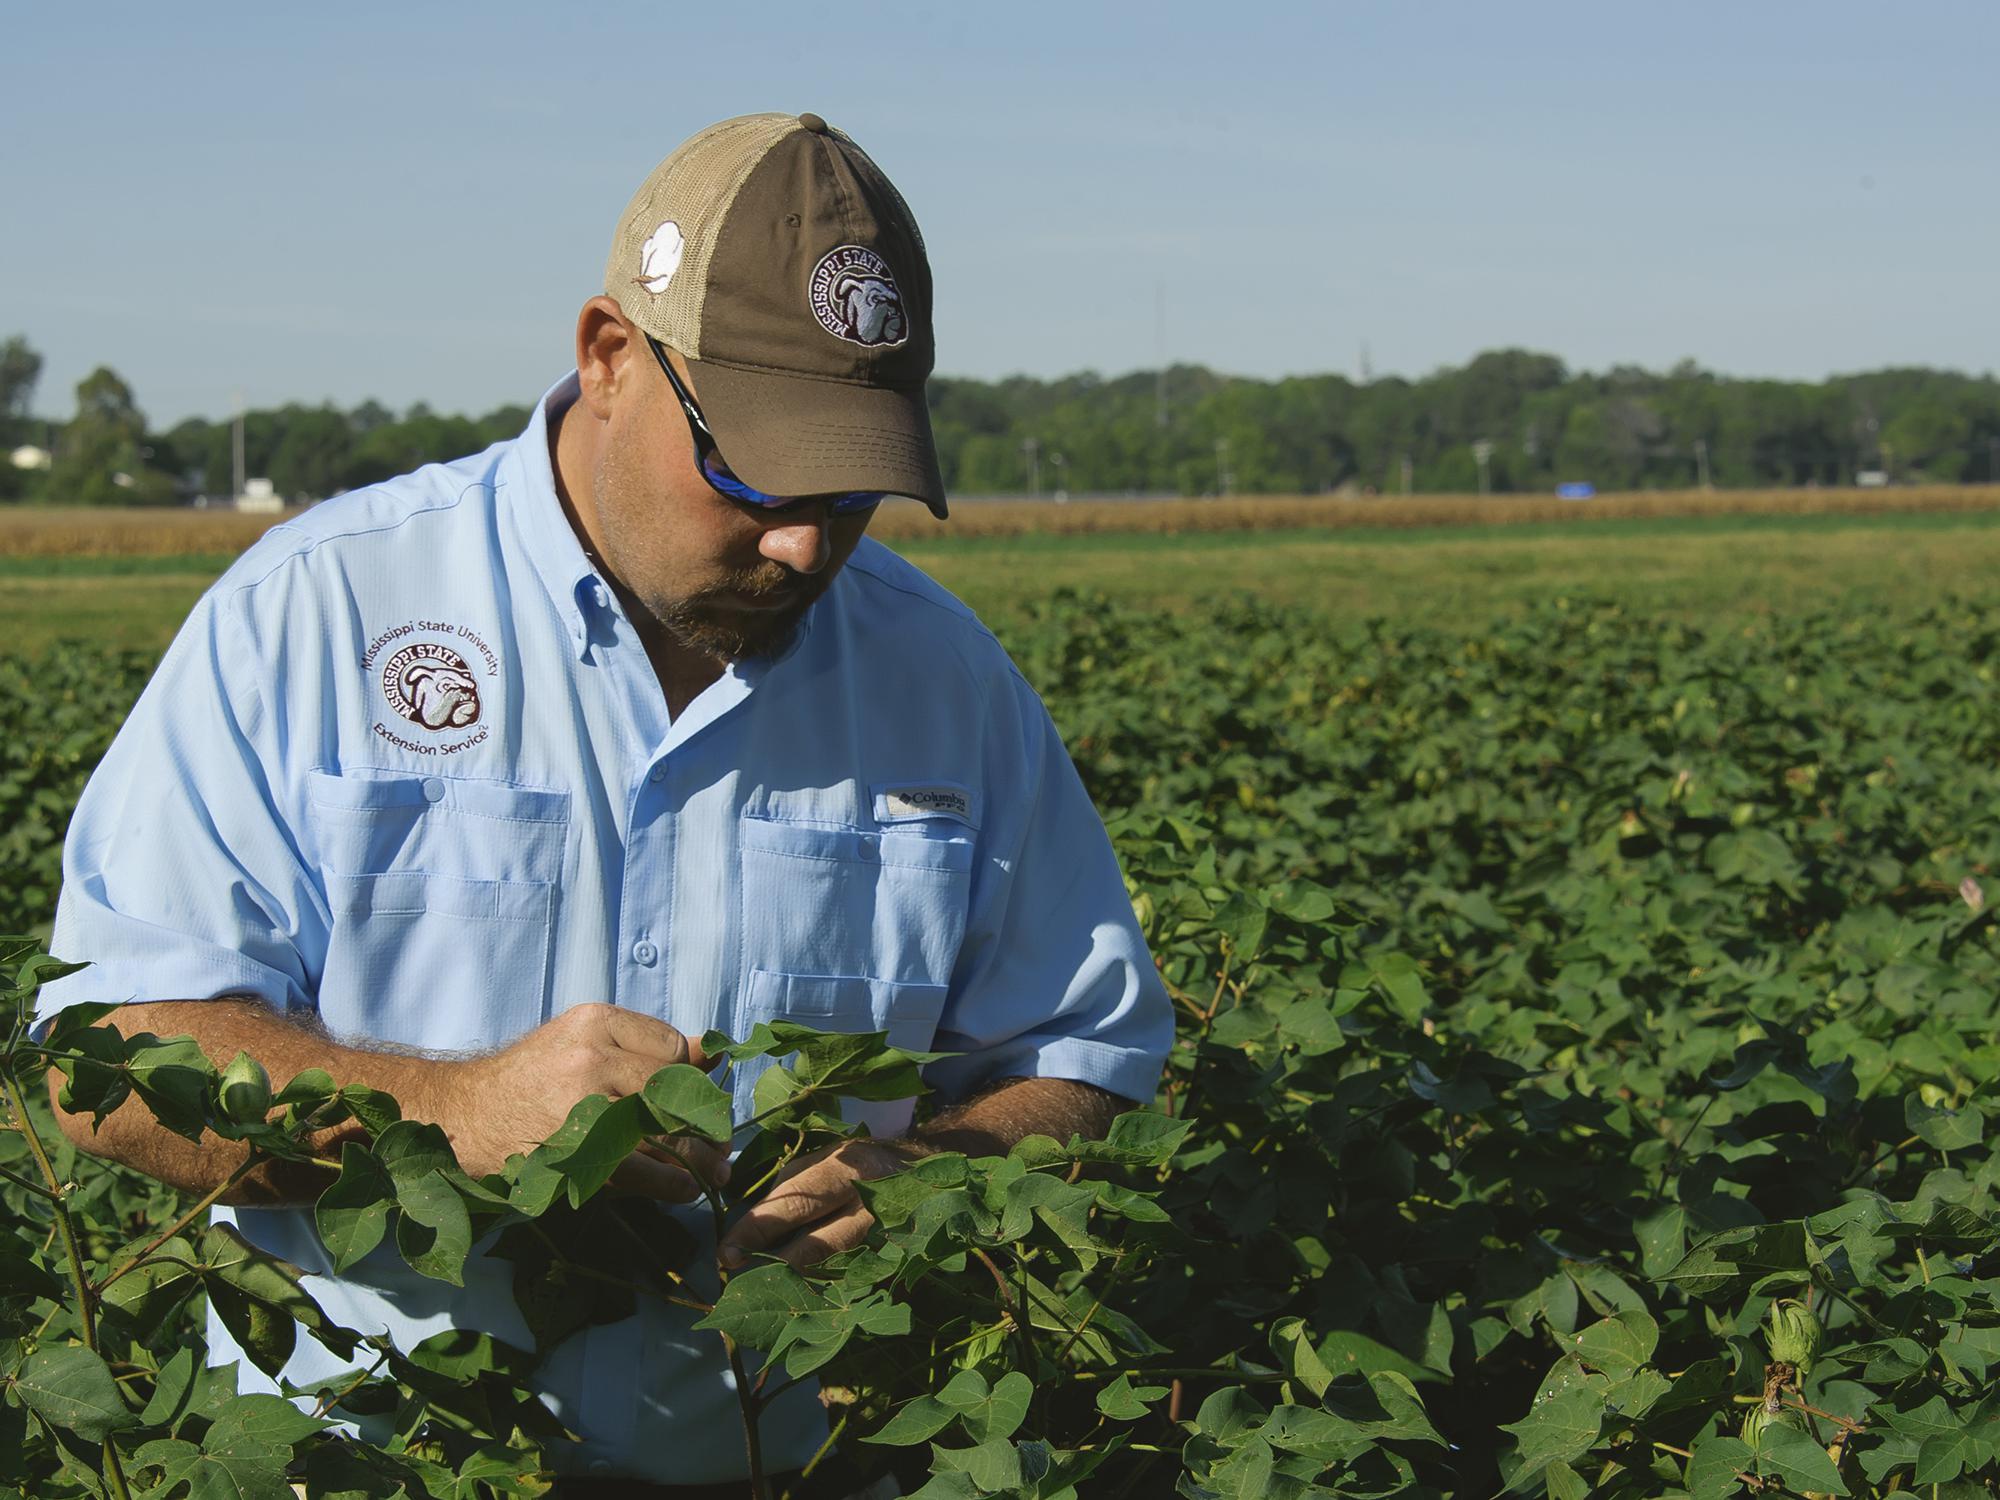 Darrin Dodds, cotton specialist with the Mississippi State University Extension Service, examines cotton in the field at the MSU R.R. Foil Plant Science Research Center in Starkville, Mississippi, on Aug. 26, 2014. (Photo by MSU Ag Communications/Kevin Hudson)